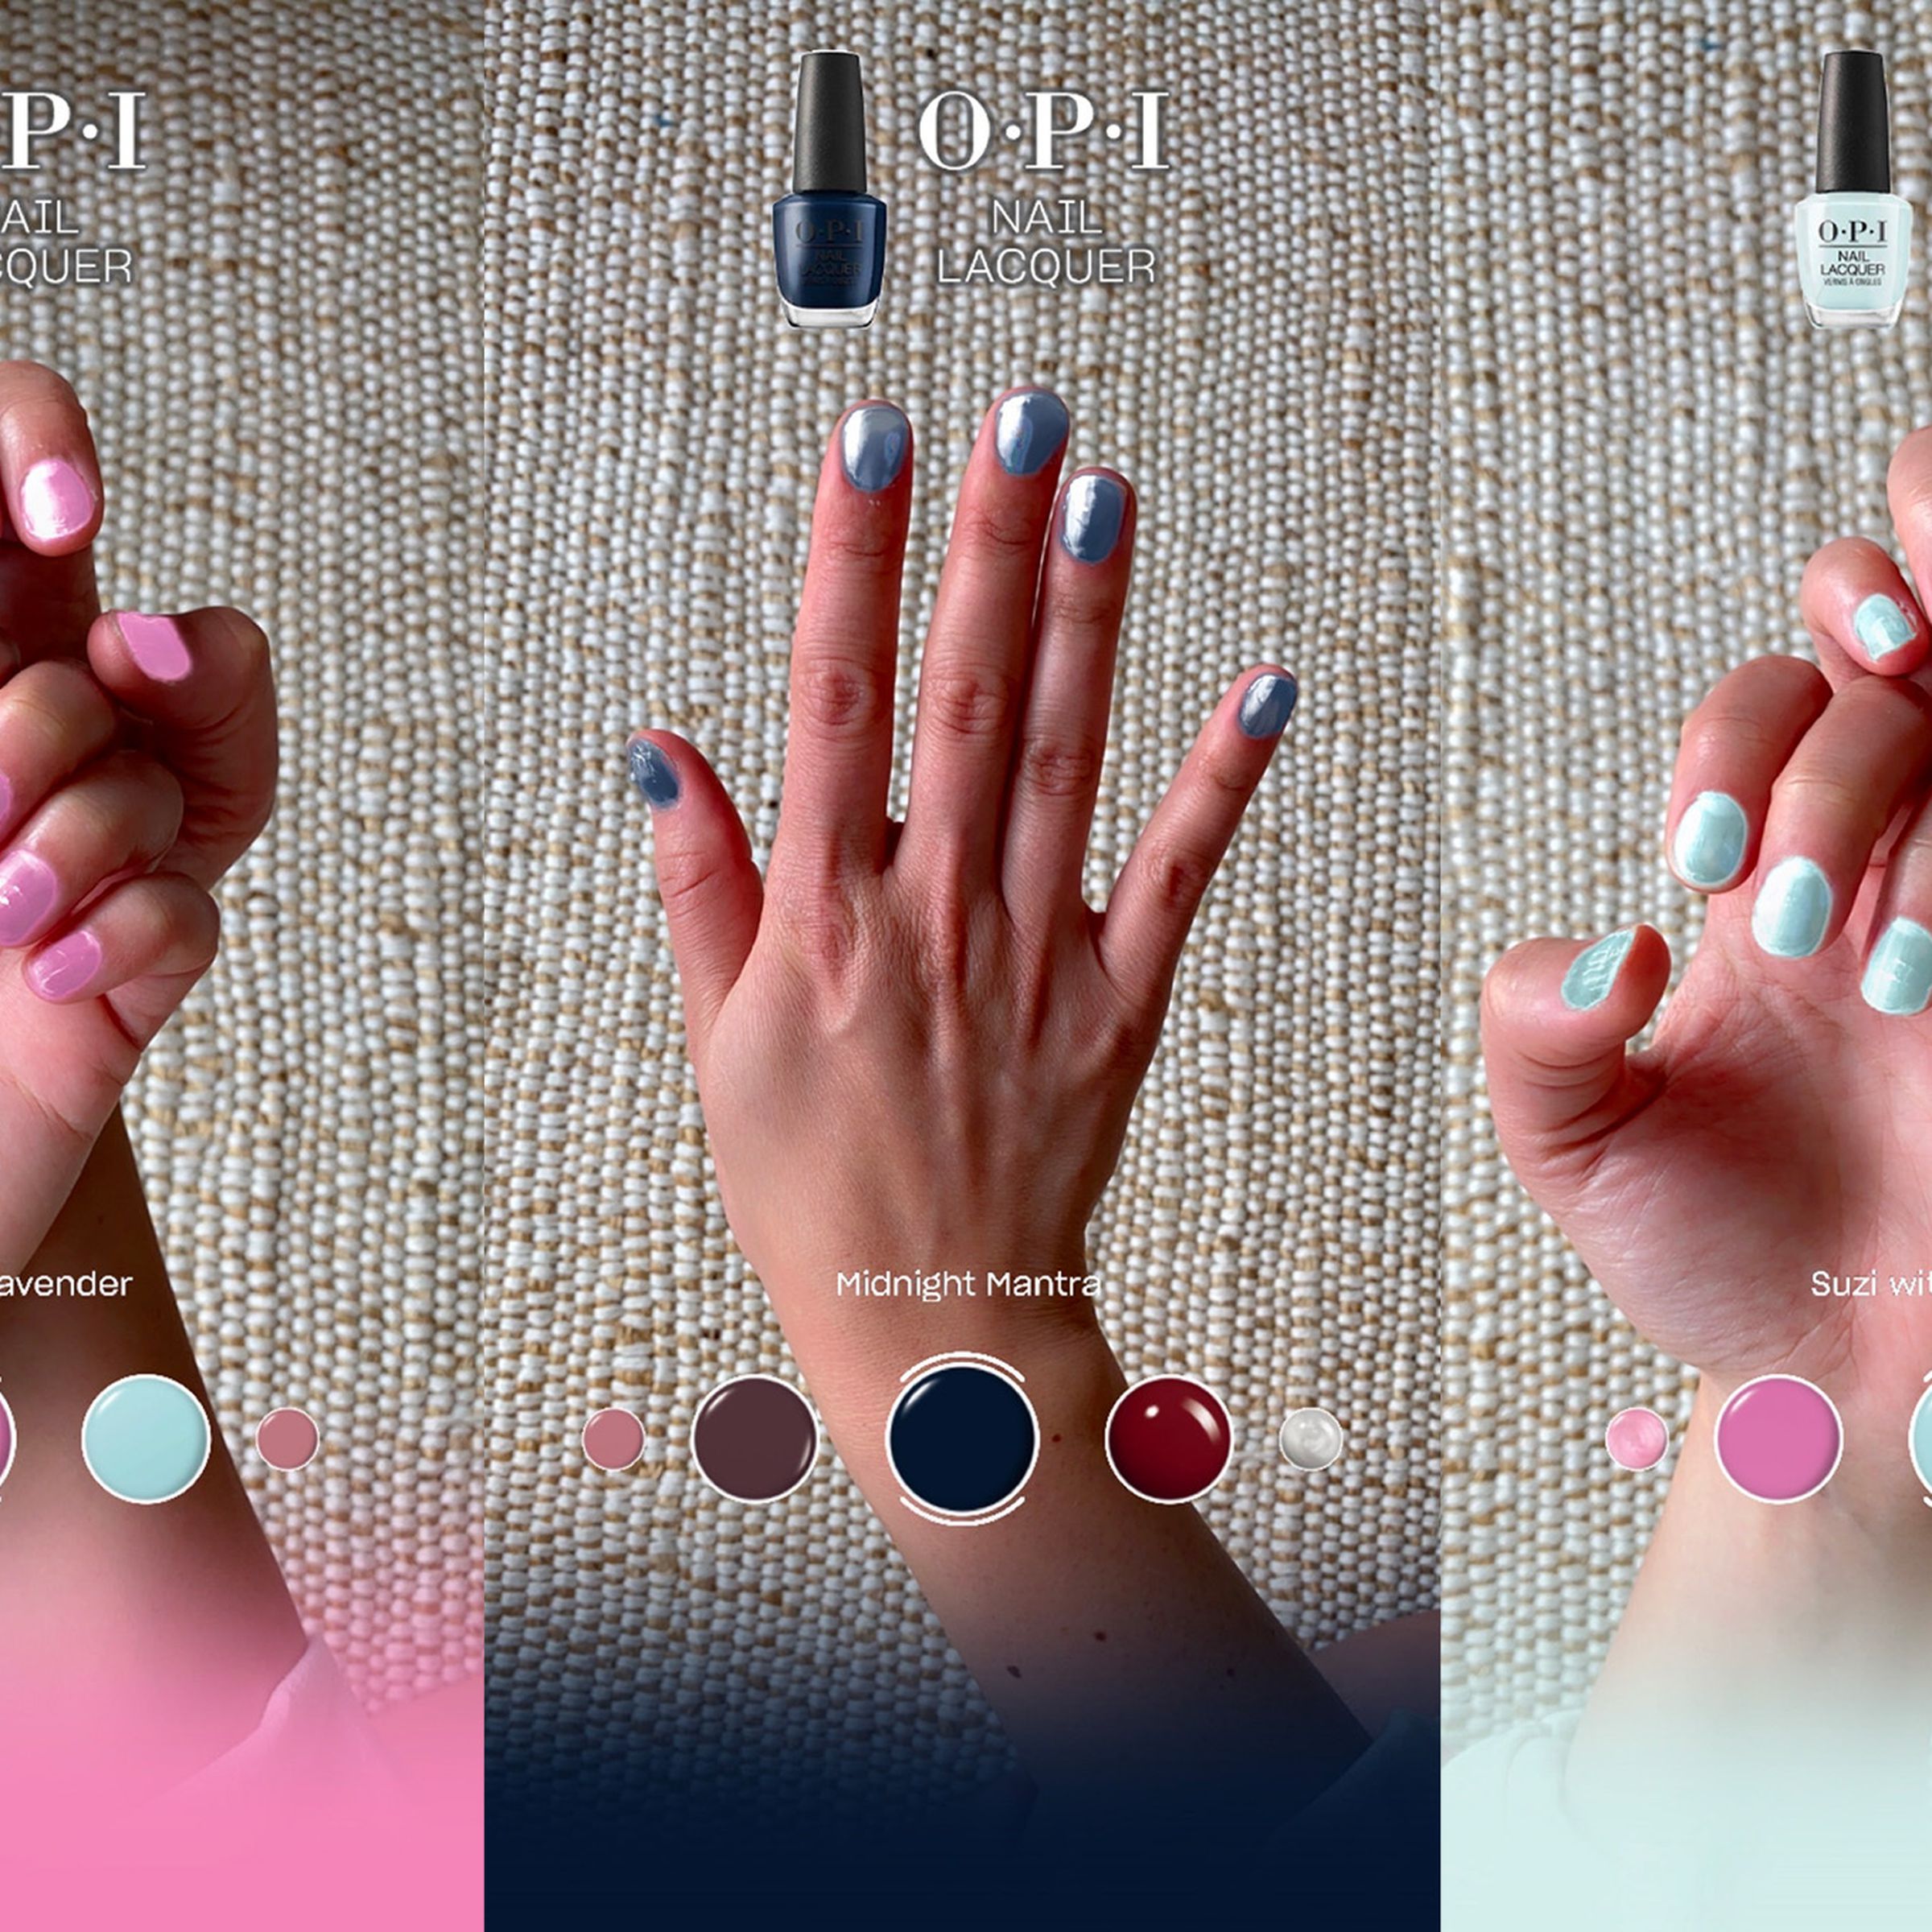 Three Snapchat filter images with hands in the frame. Each has a different color digital manicure applied. 